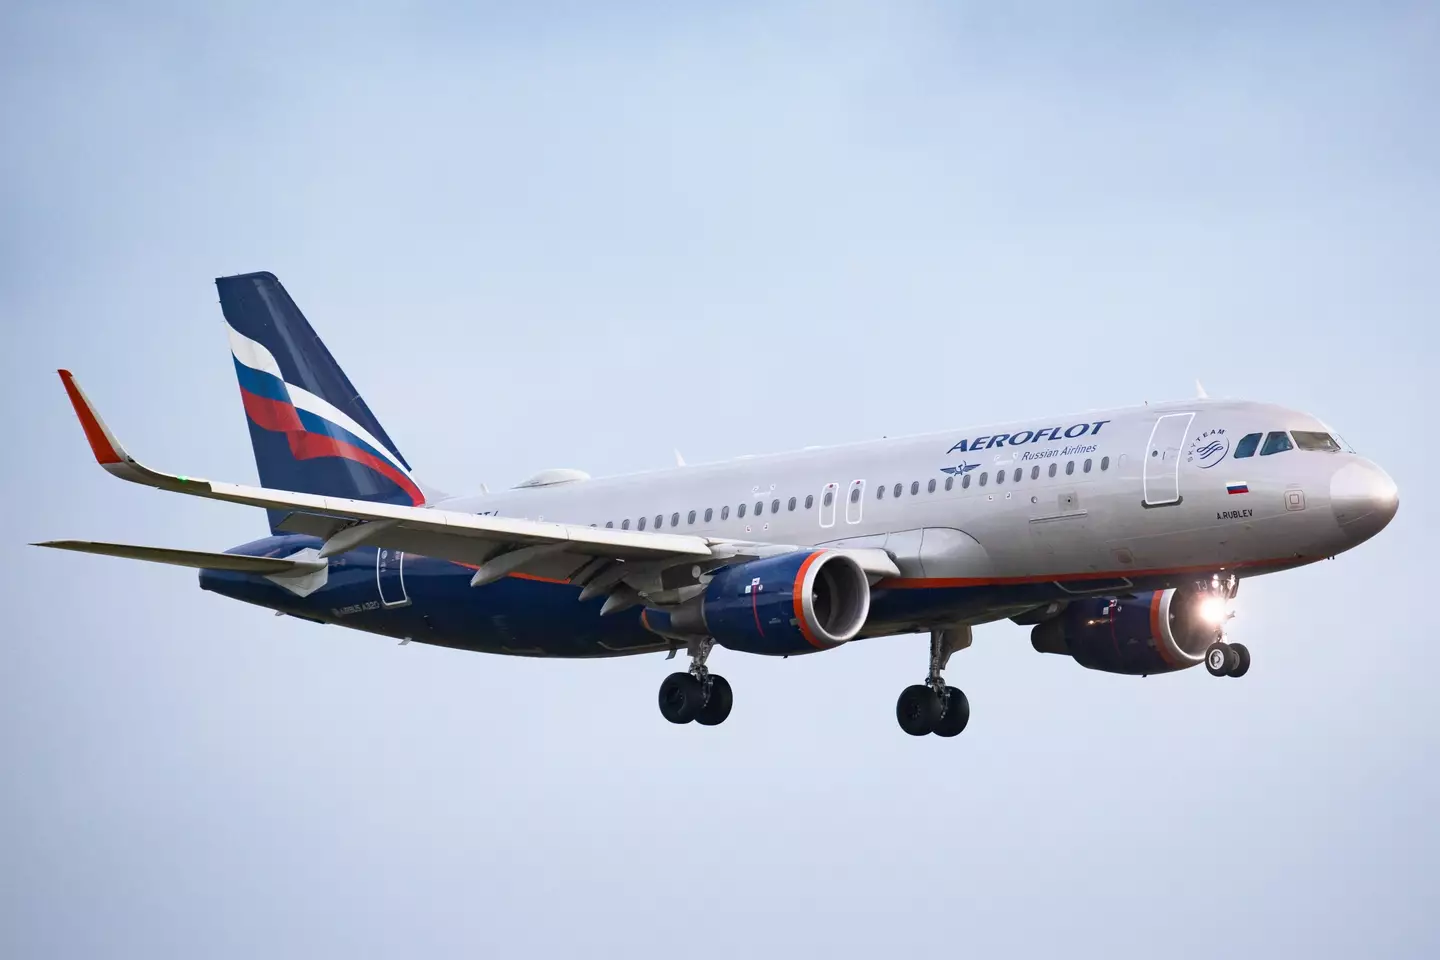 Aeroflot is a Russian airline.